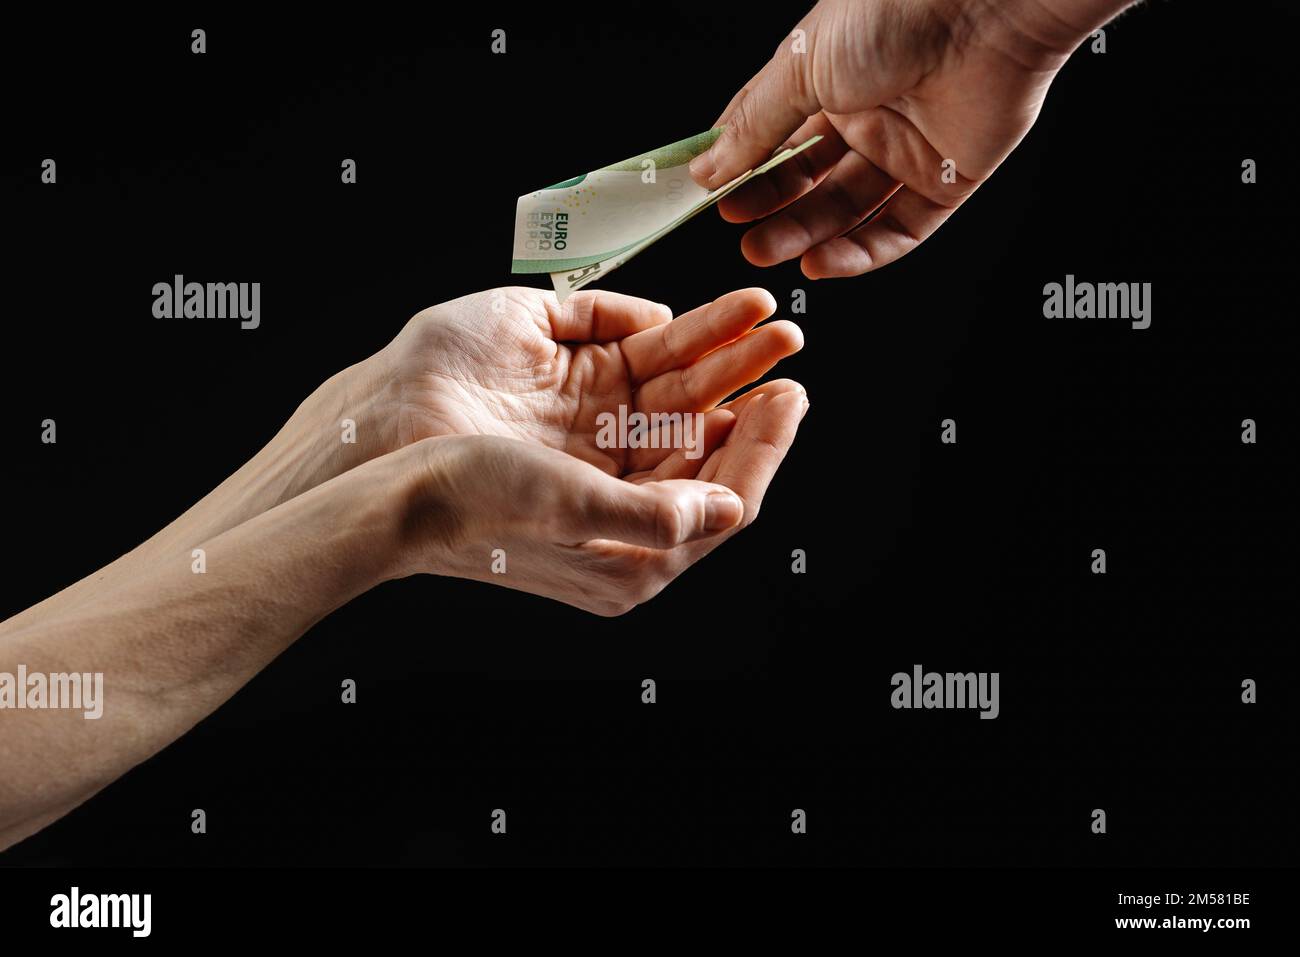 Aid money. Help with money in Europe. The concept of helping homeless and disadvantaged people. Stock Photo